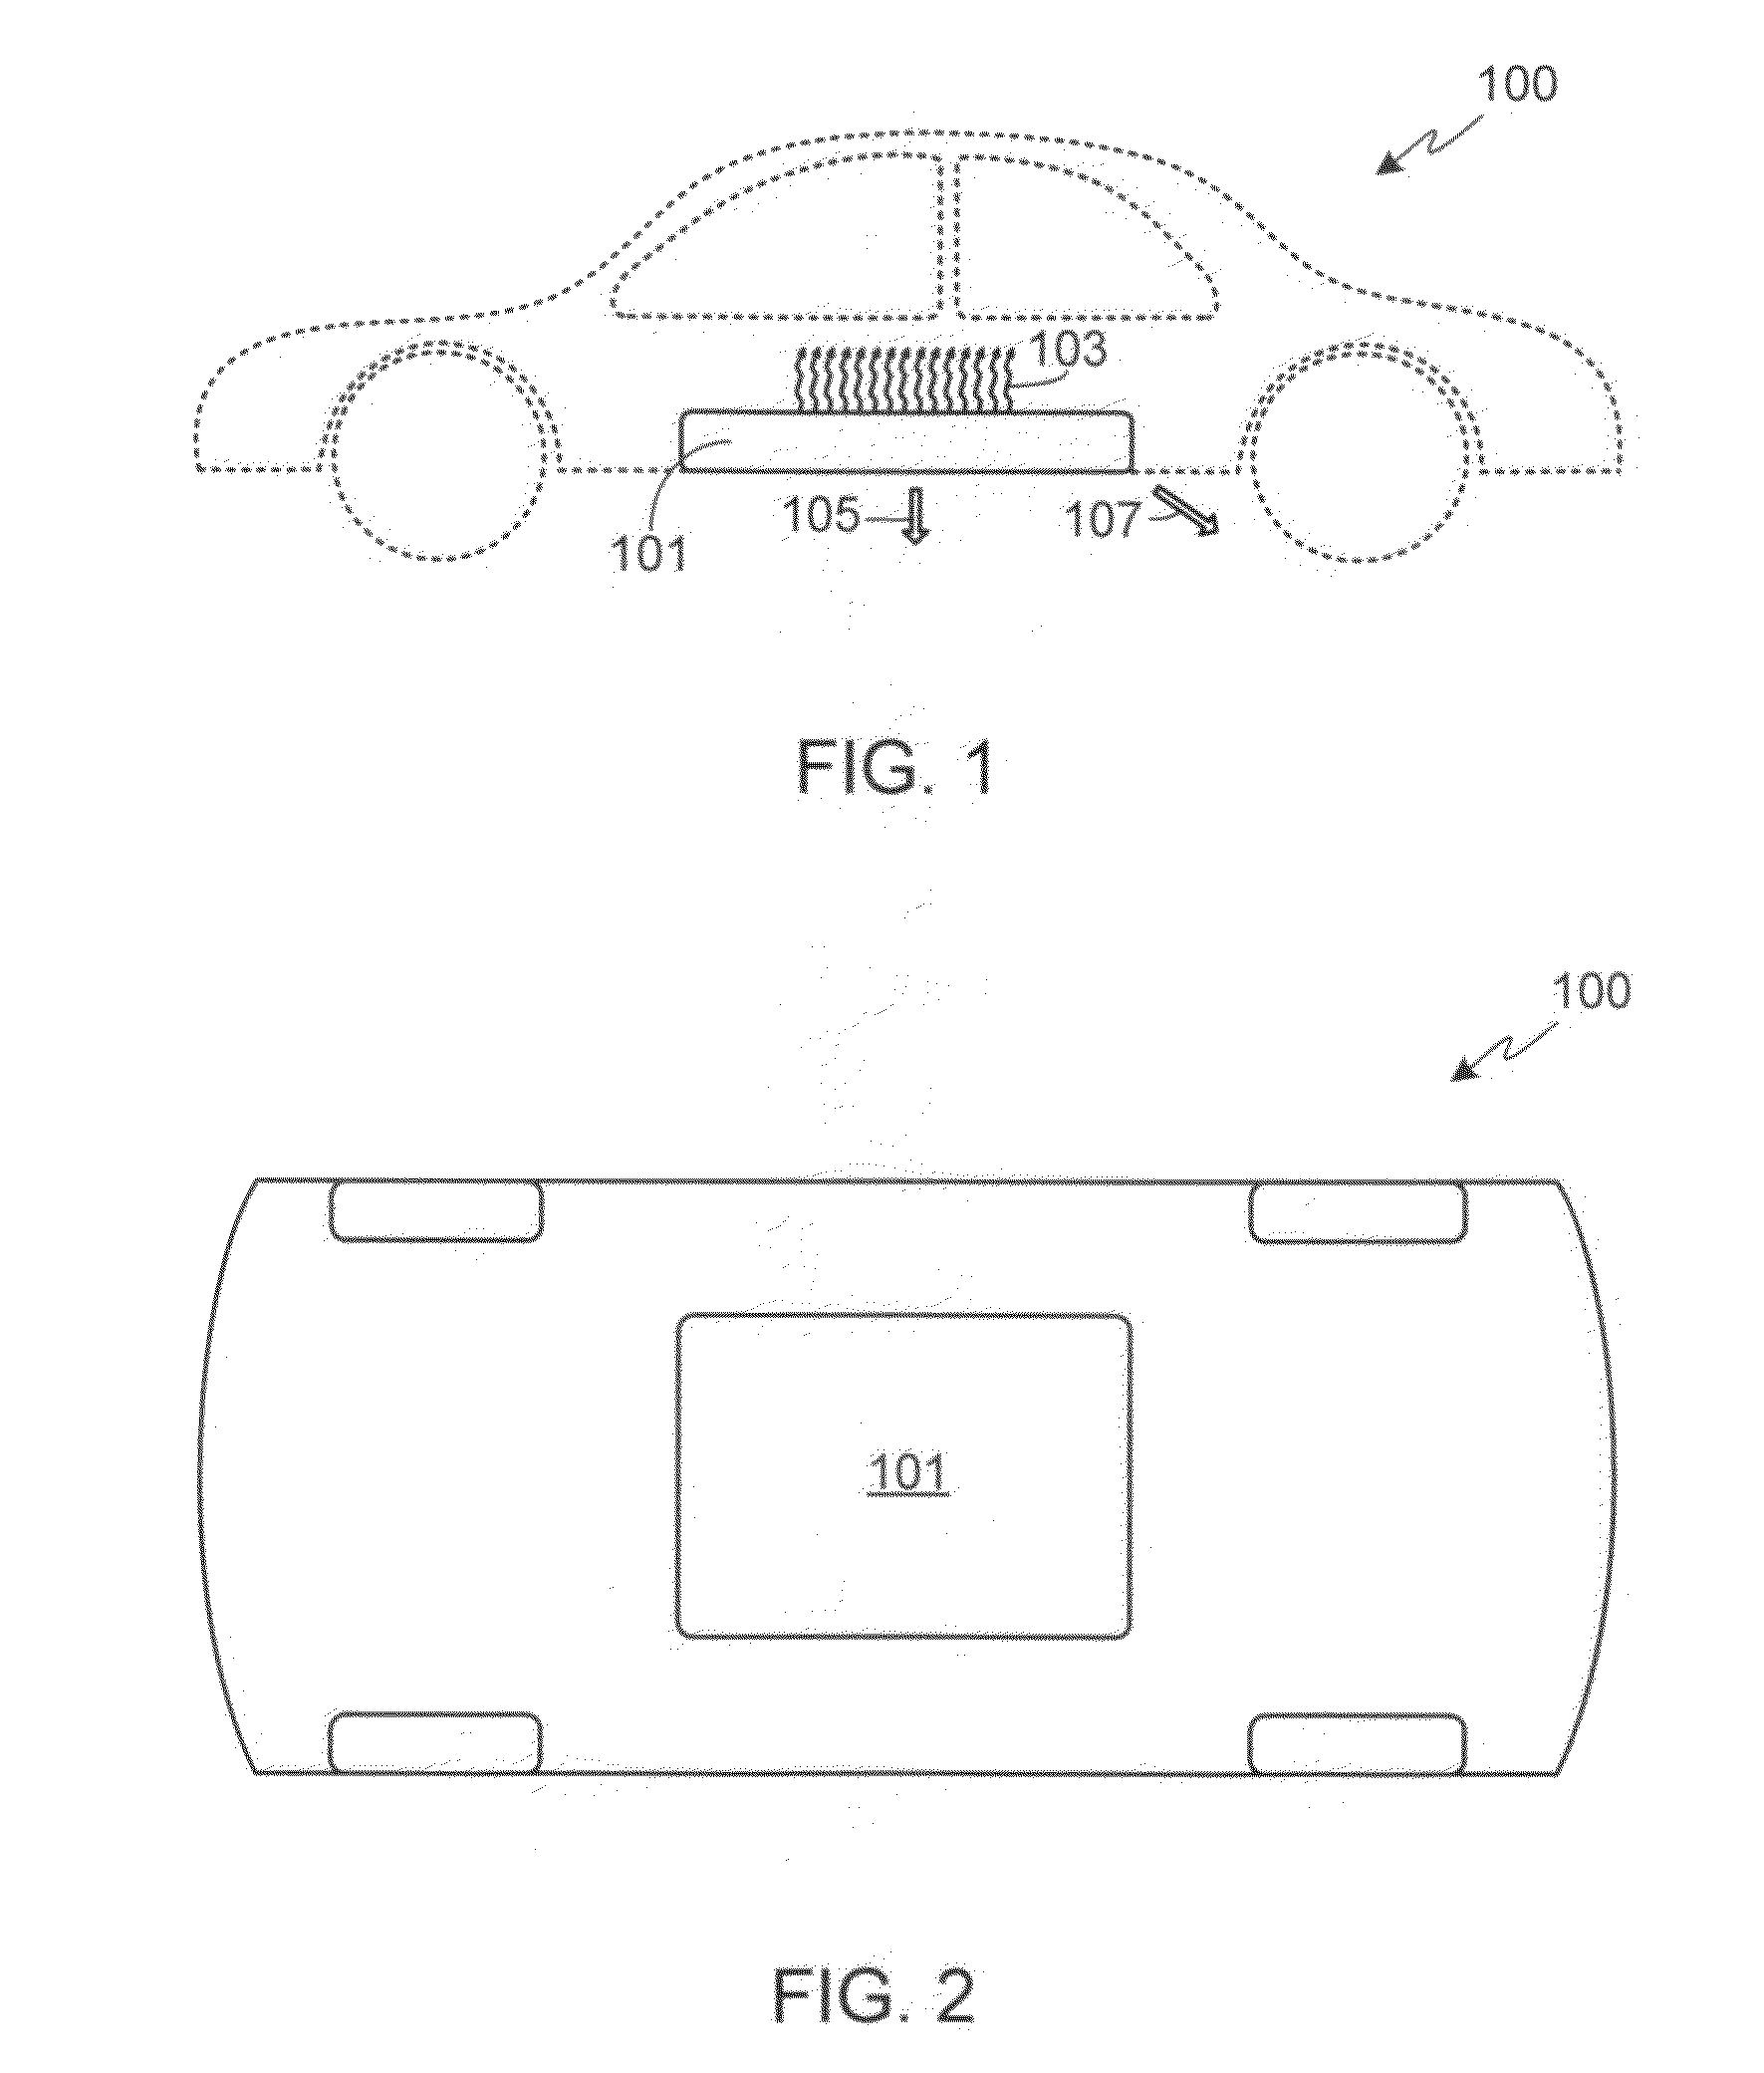 Battery pack enclosure with controlled thermal runaway release system